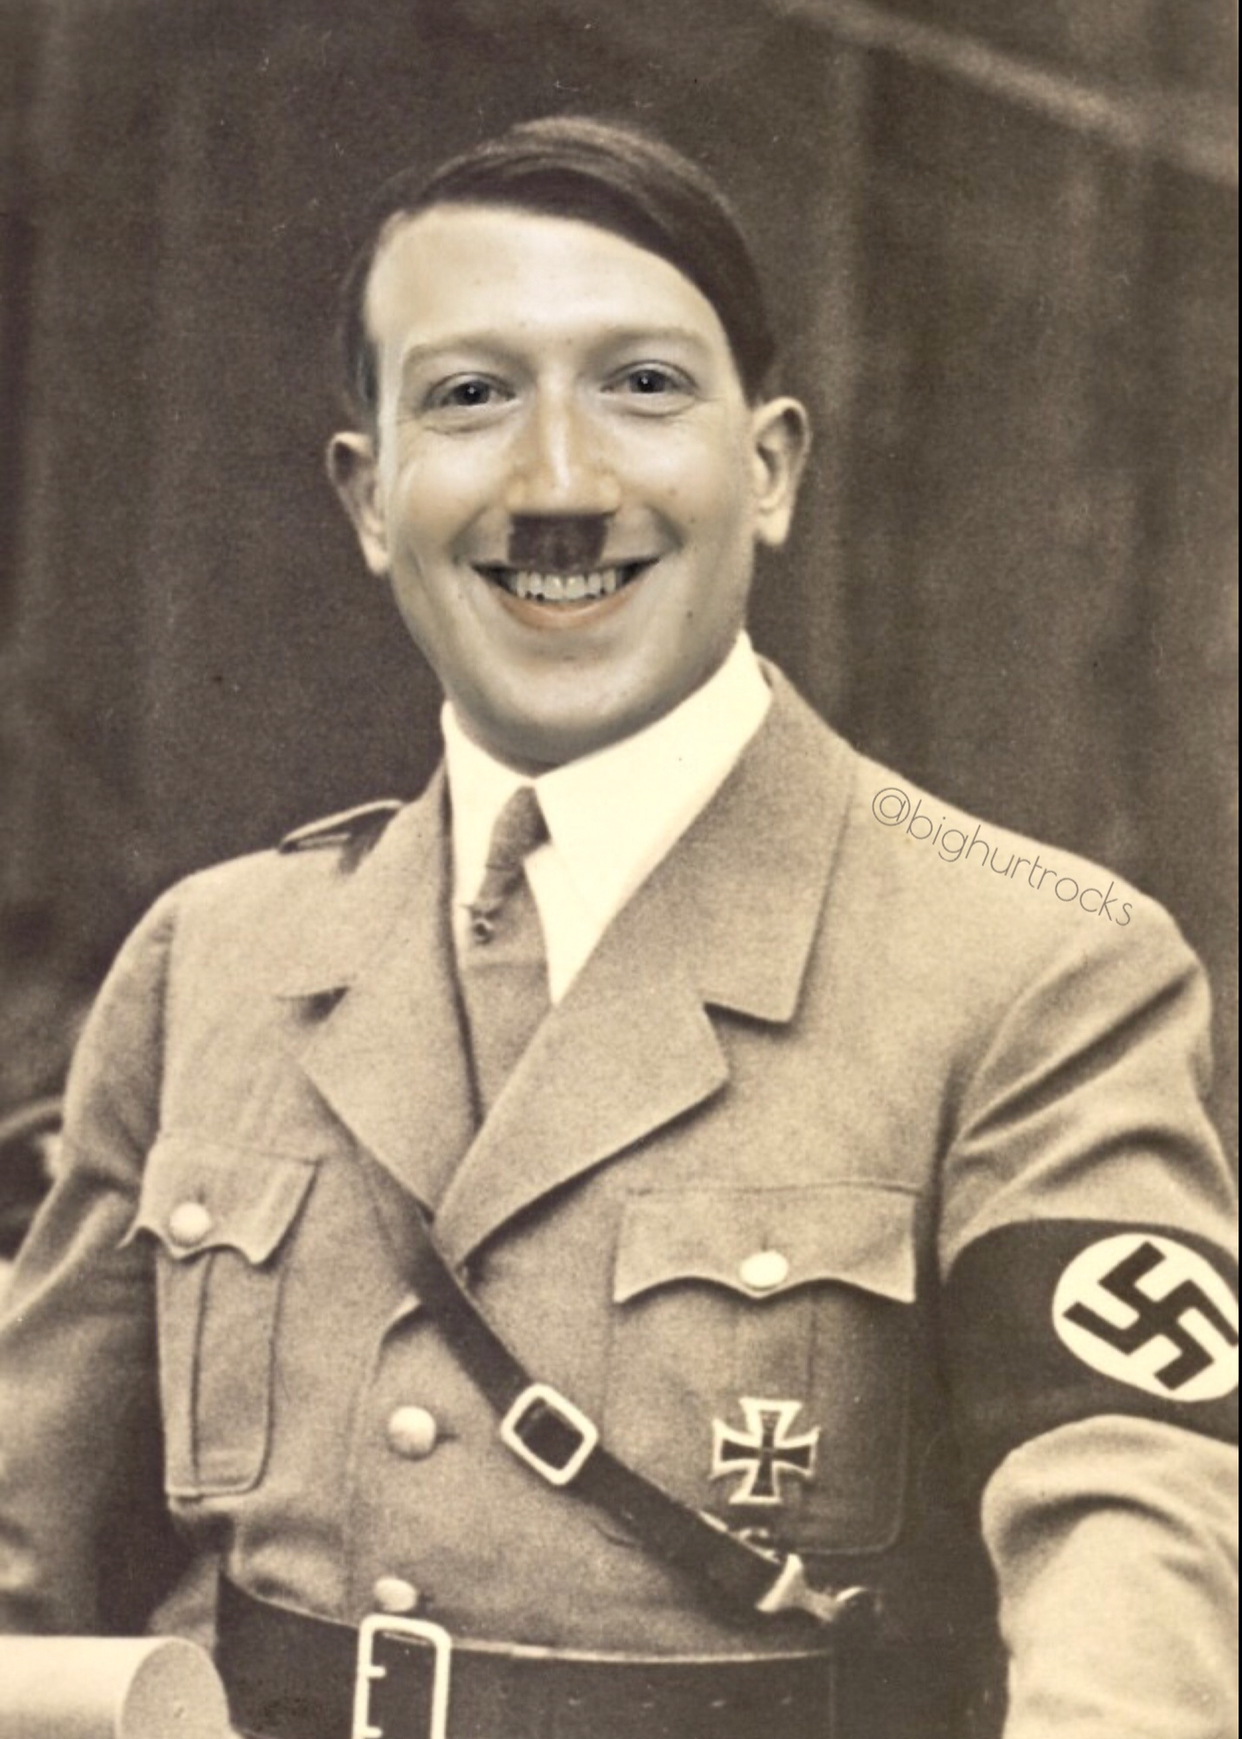 Some of my Zuck edit collection